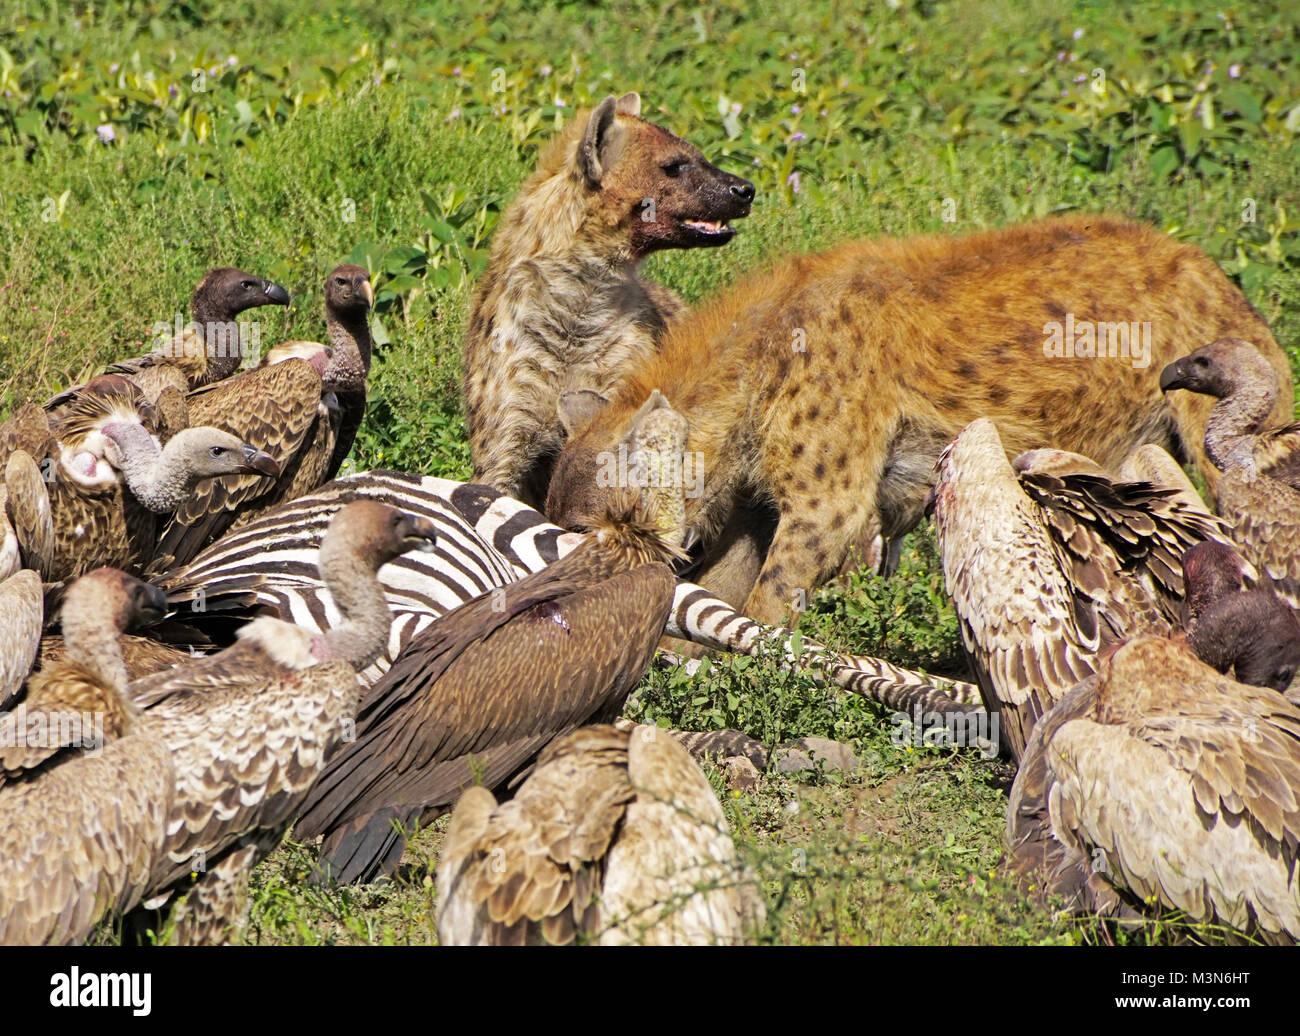 Two spotted hyenas and vultures scavenge the carcass of a dead zebra on southern Serengeti in Tanzania. Stock Photo